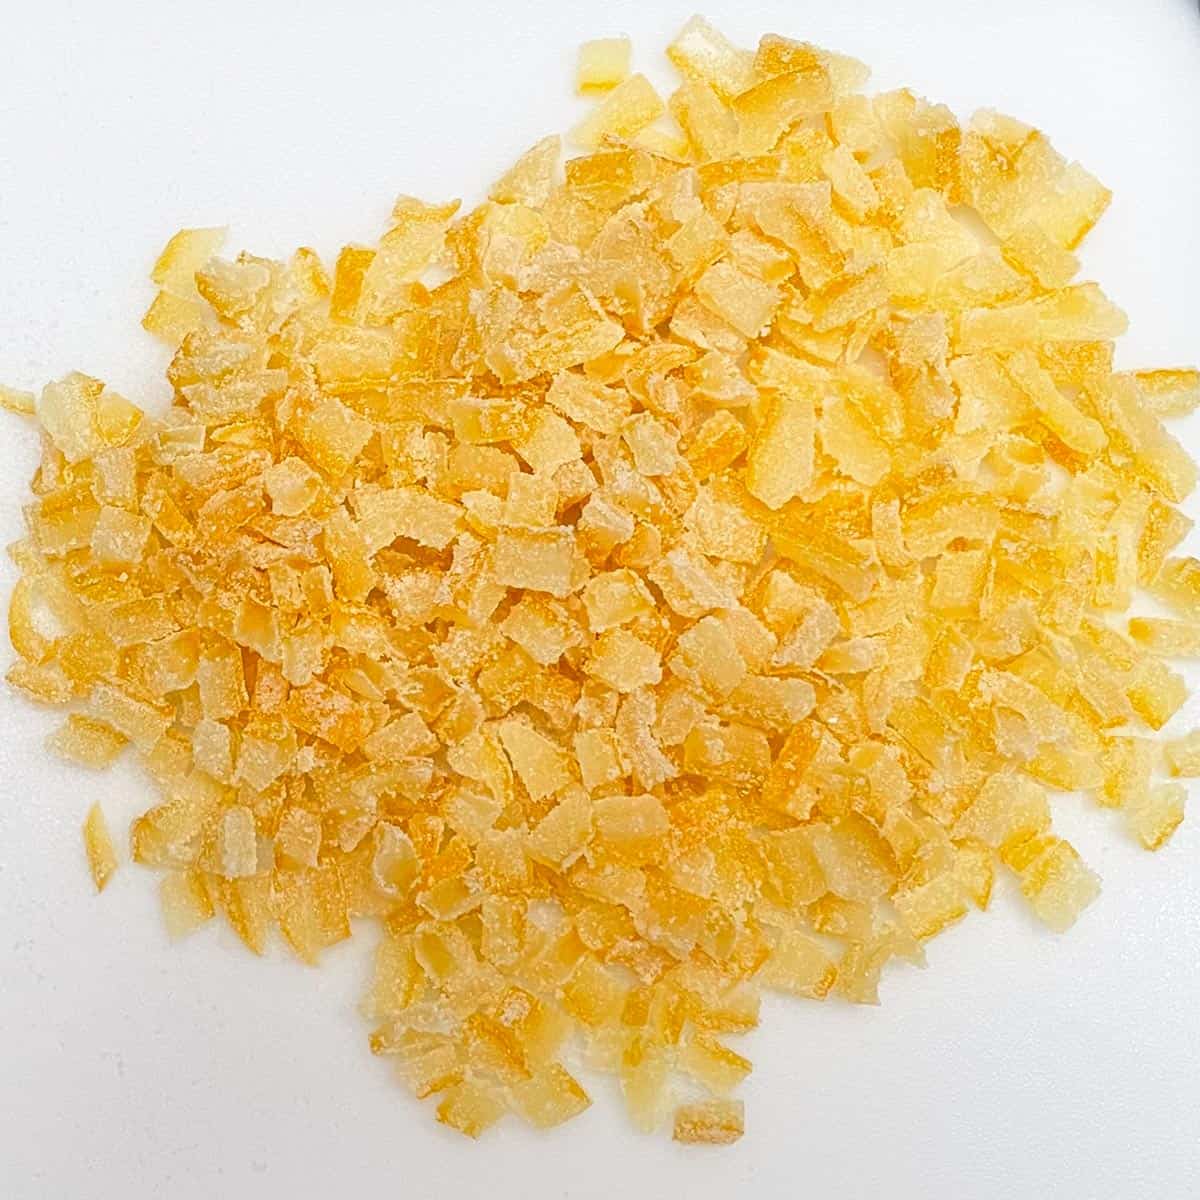 Cut up candied lemon peel to use in baking my cookies.